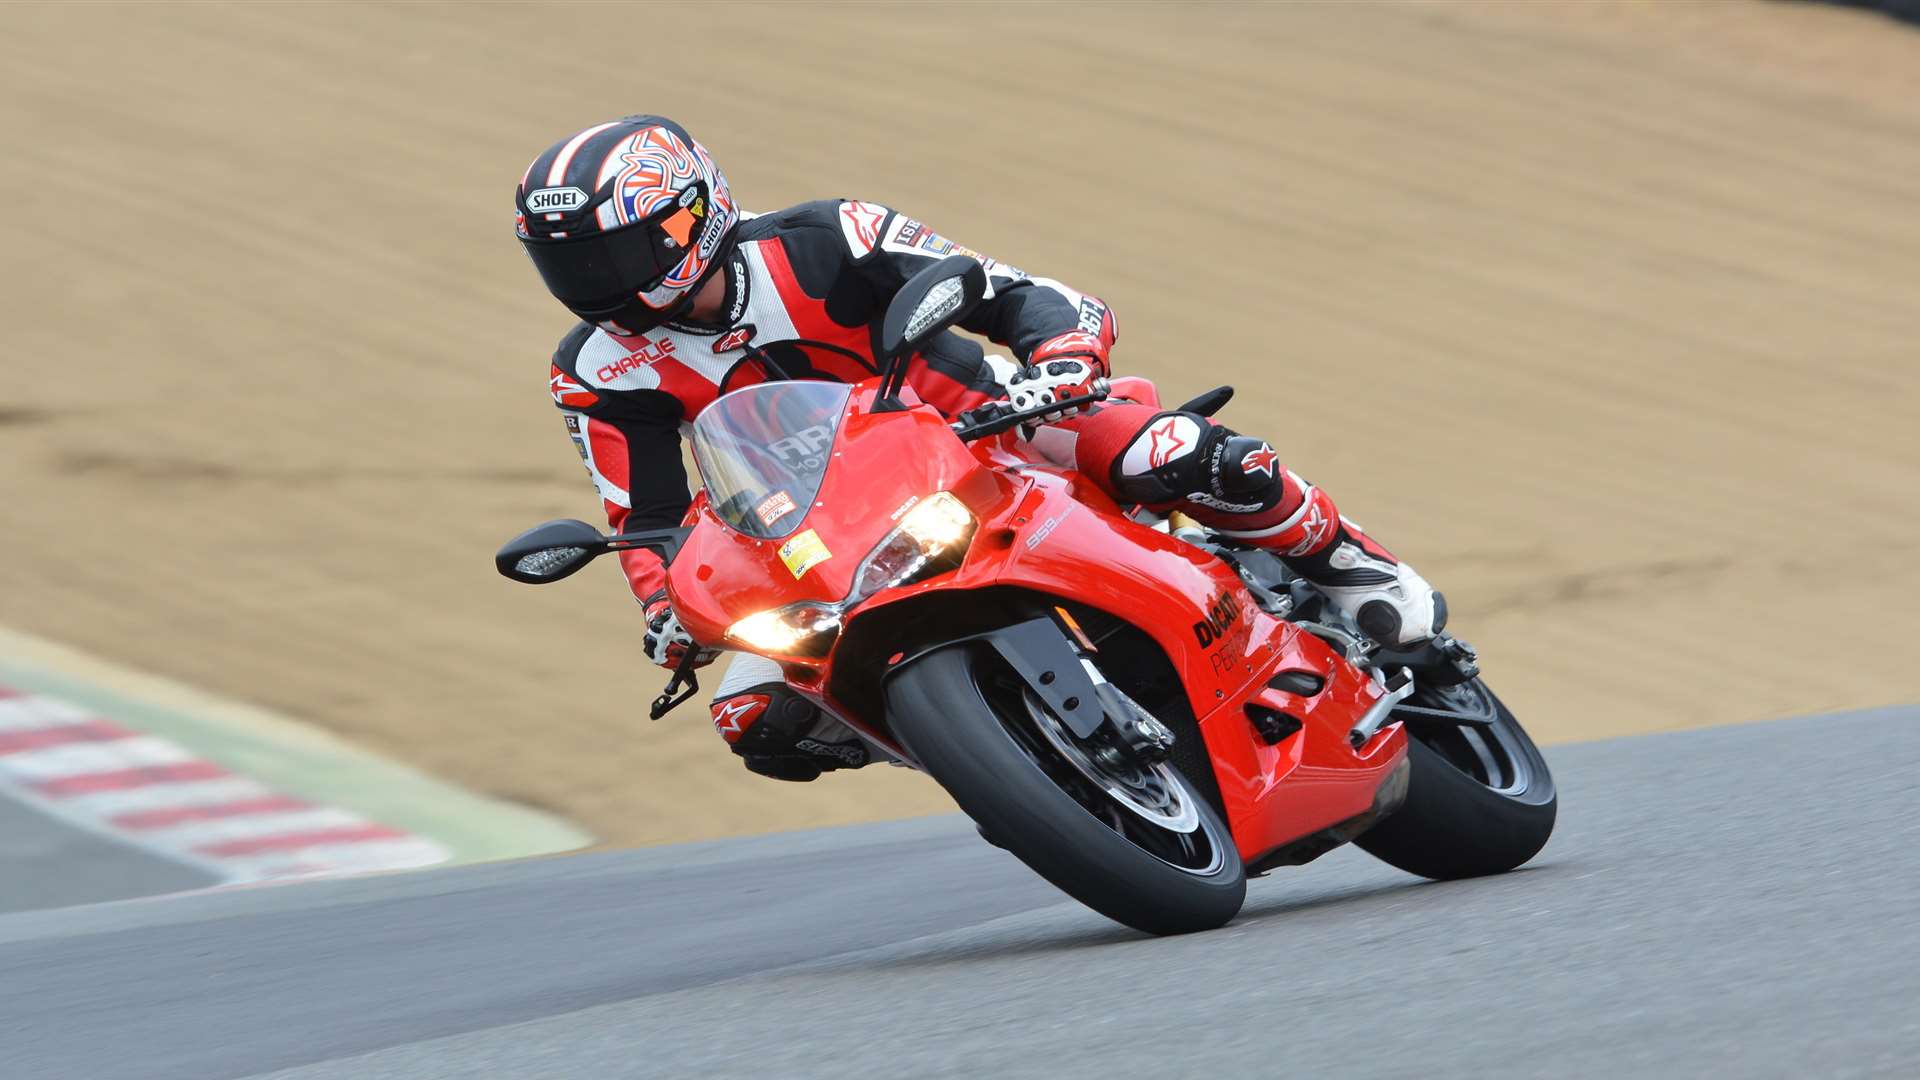 Keanu lapped the famous Kent circuit on a powerful Ducati motorcycle.